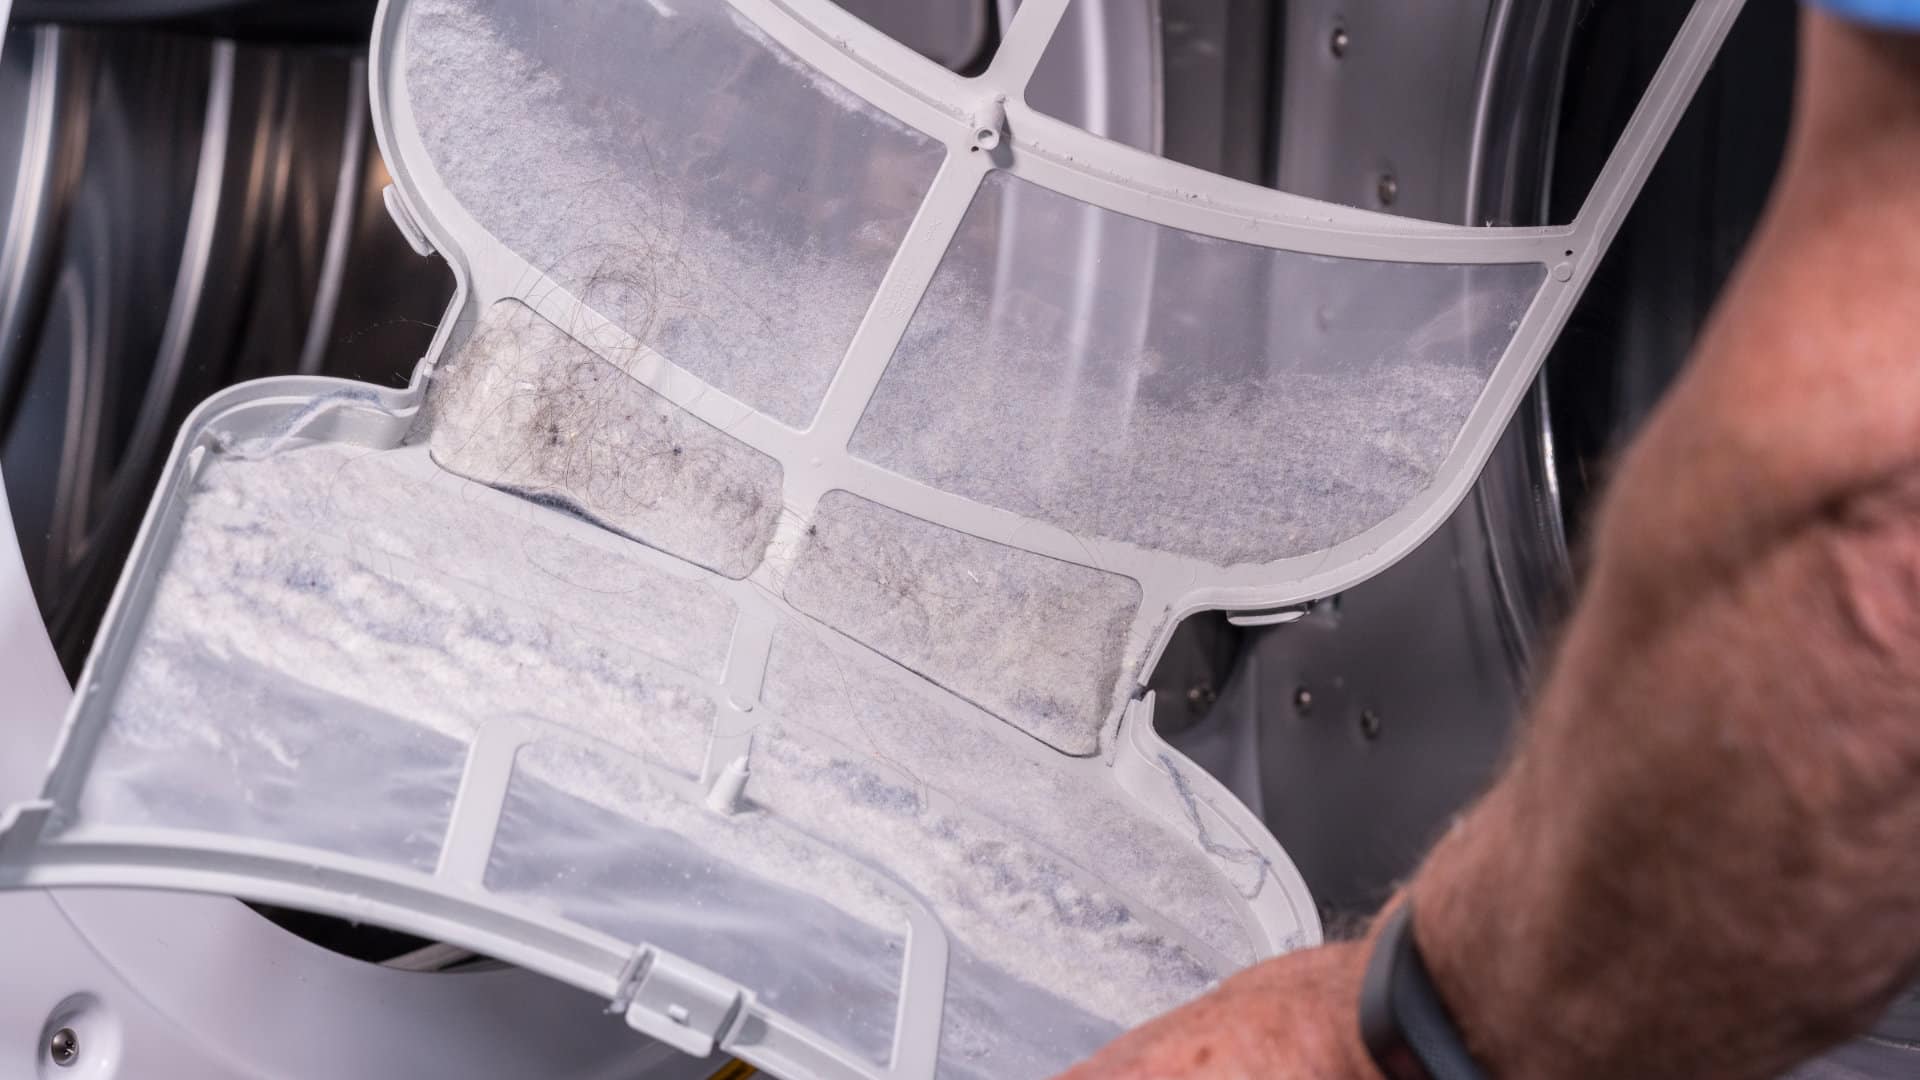 Featured image for “How To Clean a Dryer Lint Trap Properly”